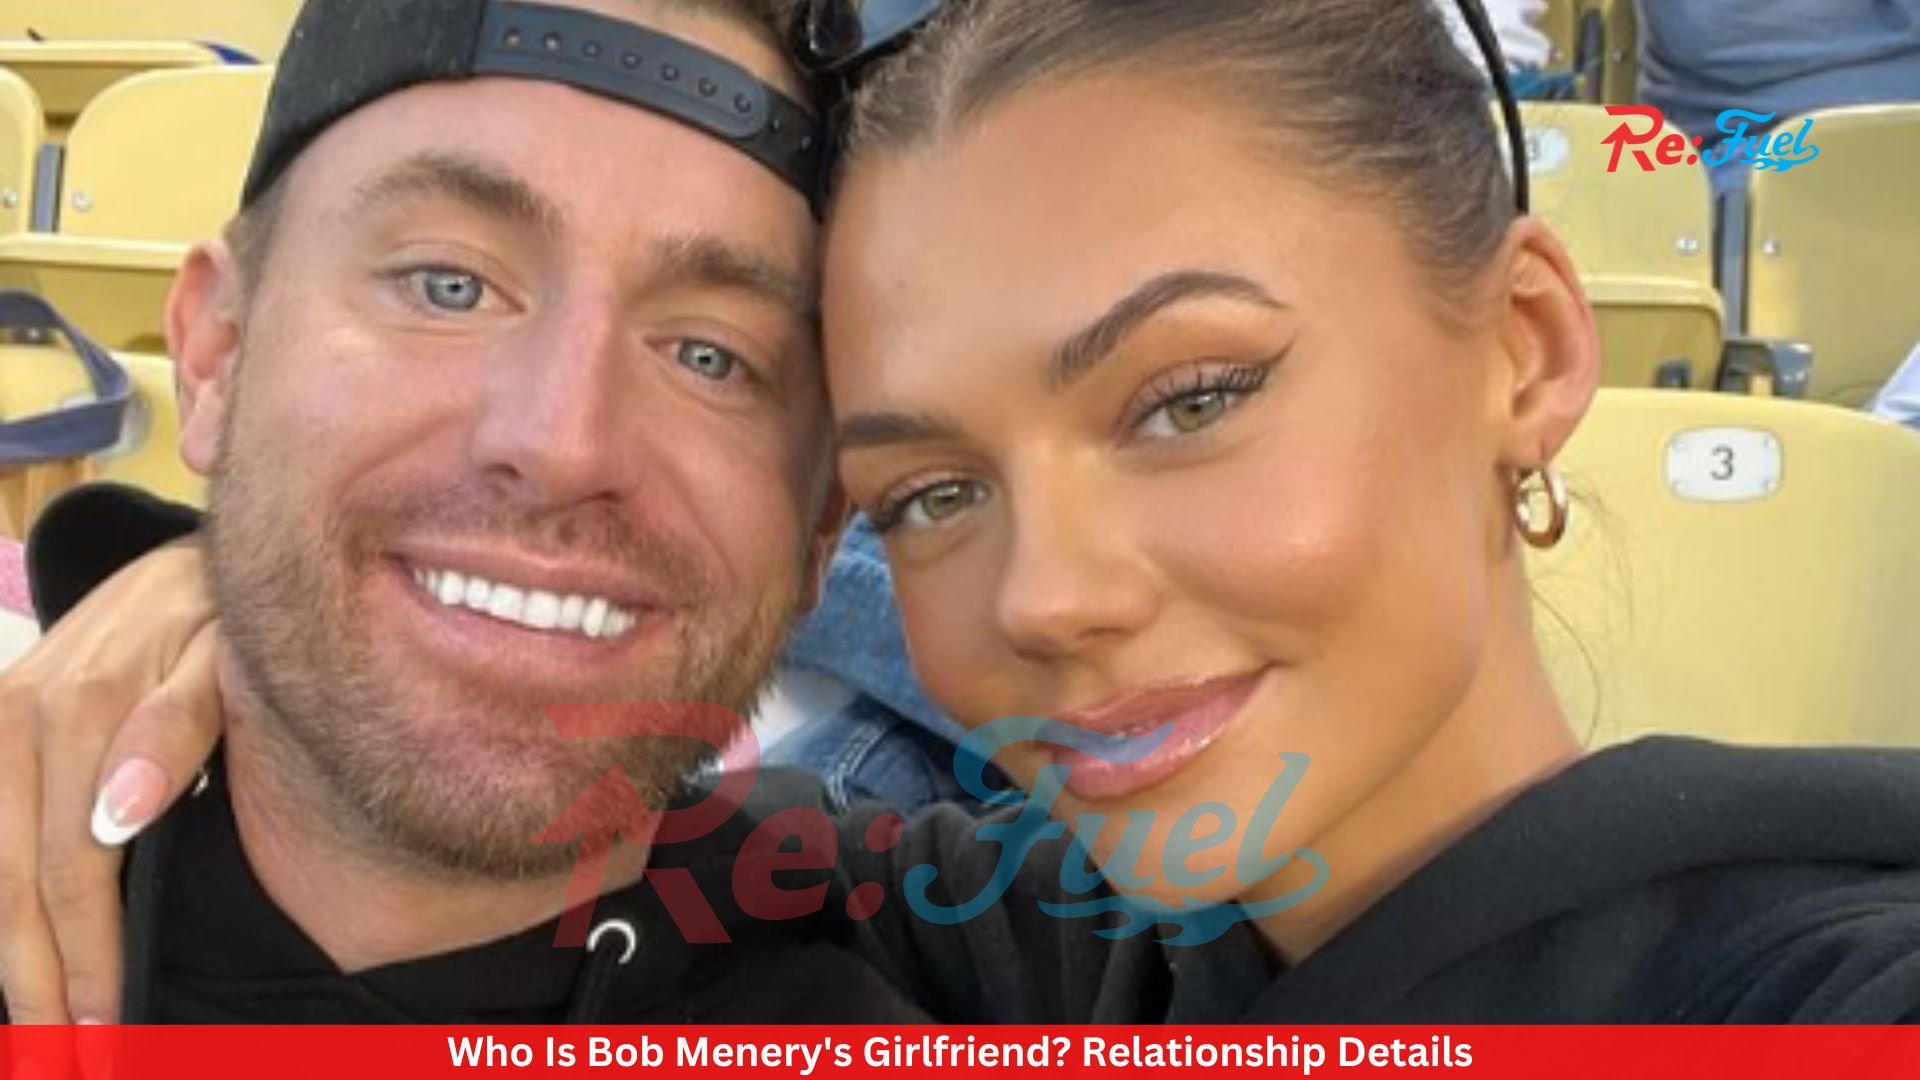 Who Is Bob Menery's Girlfriend? Relationship Details